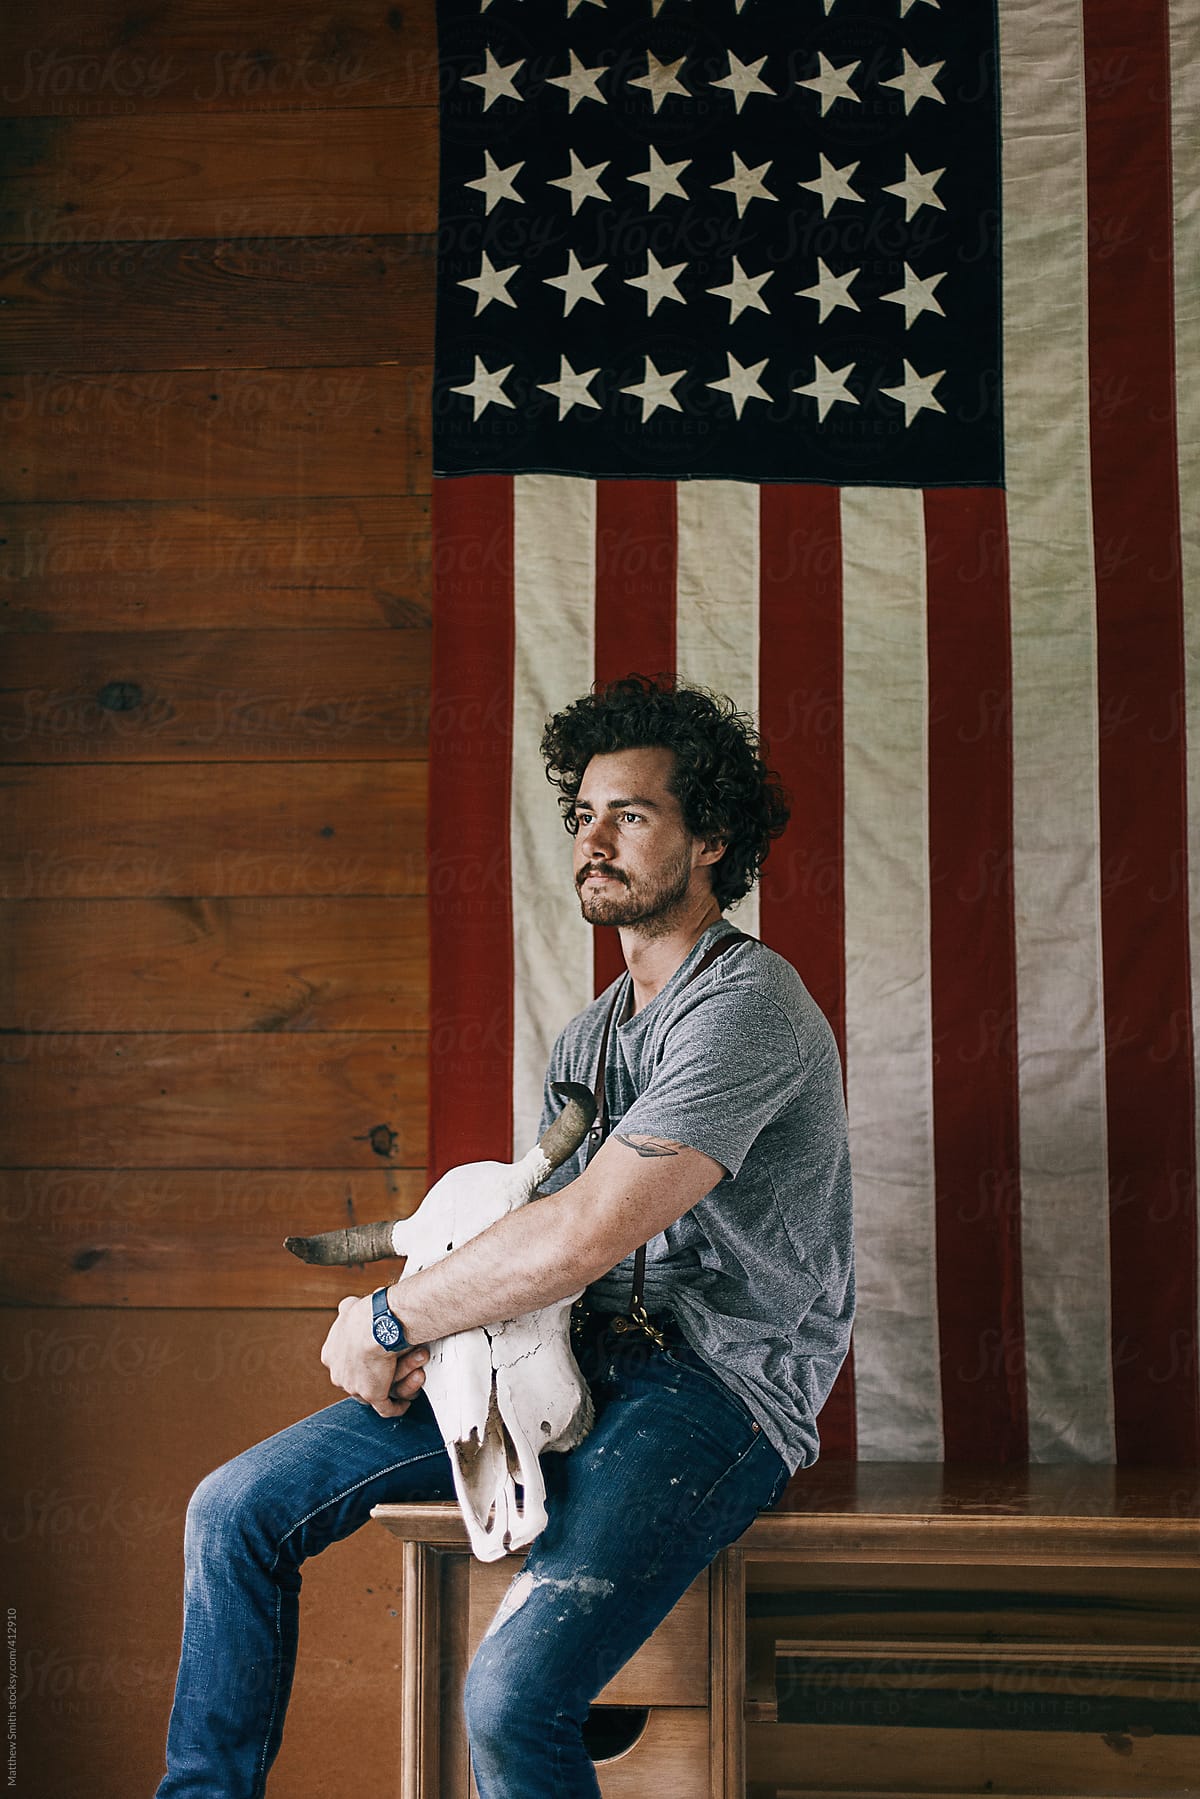 Portrait of a Confident Man Sitting in Front of an American Flag Holding a Bull Skull